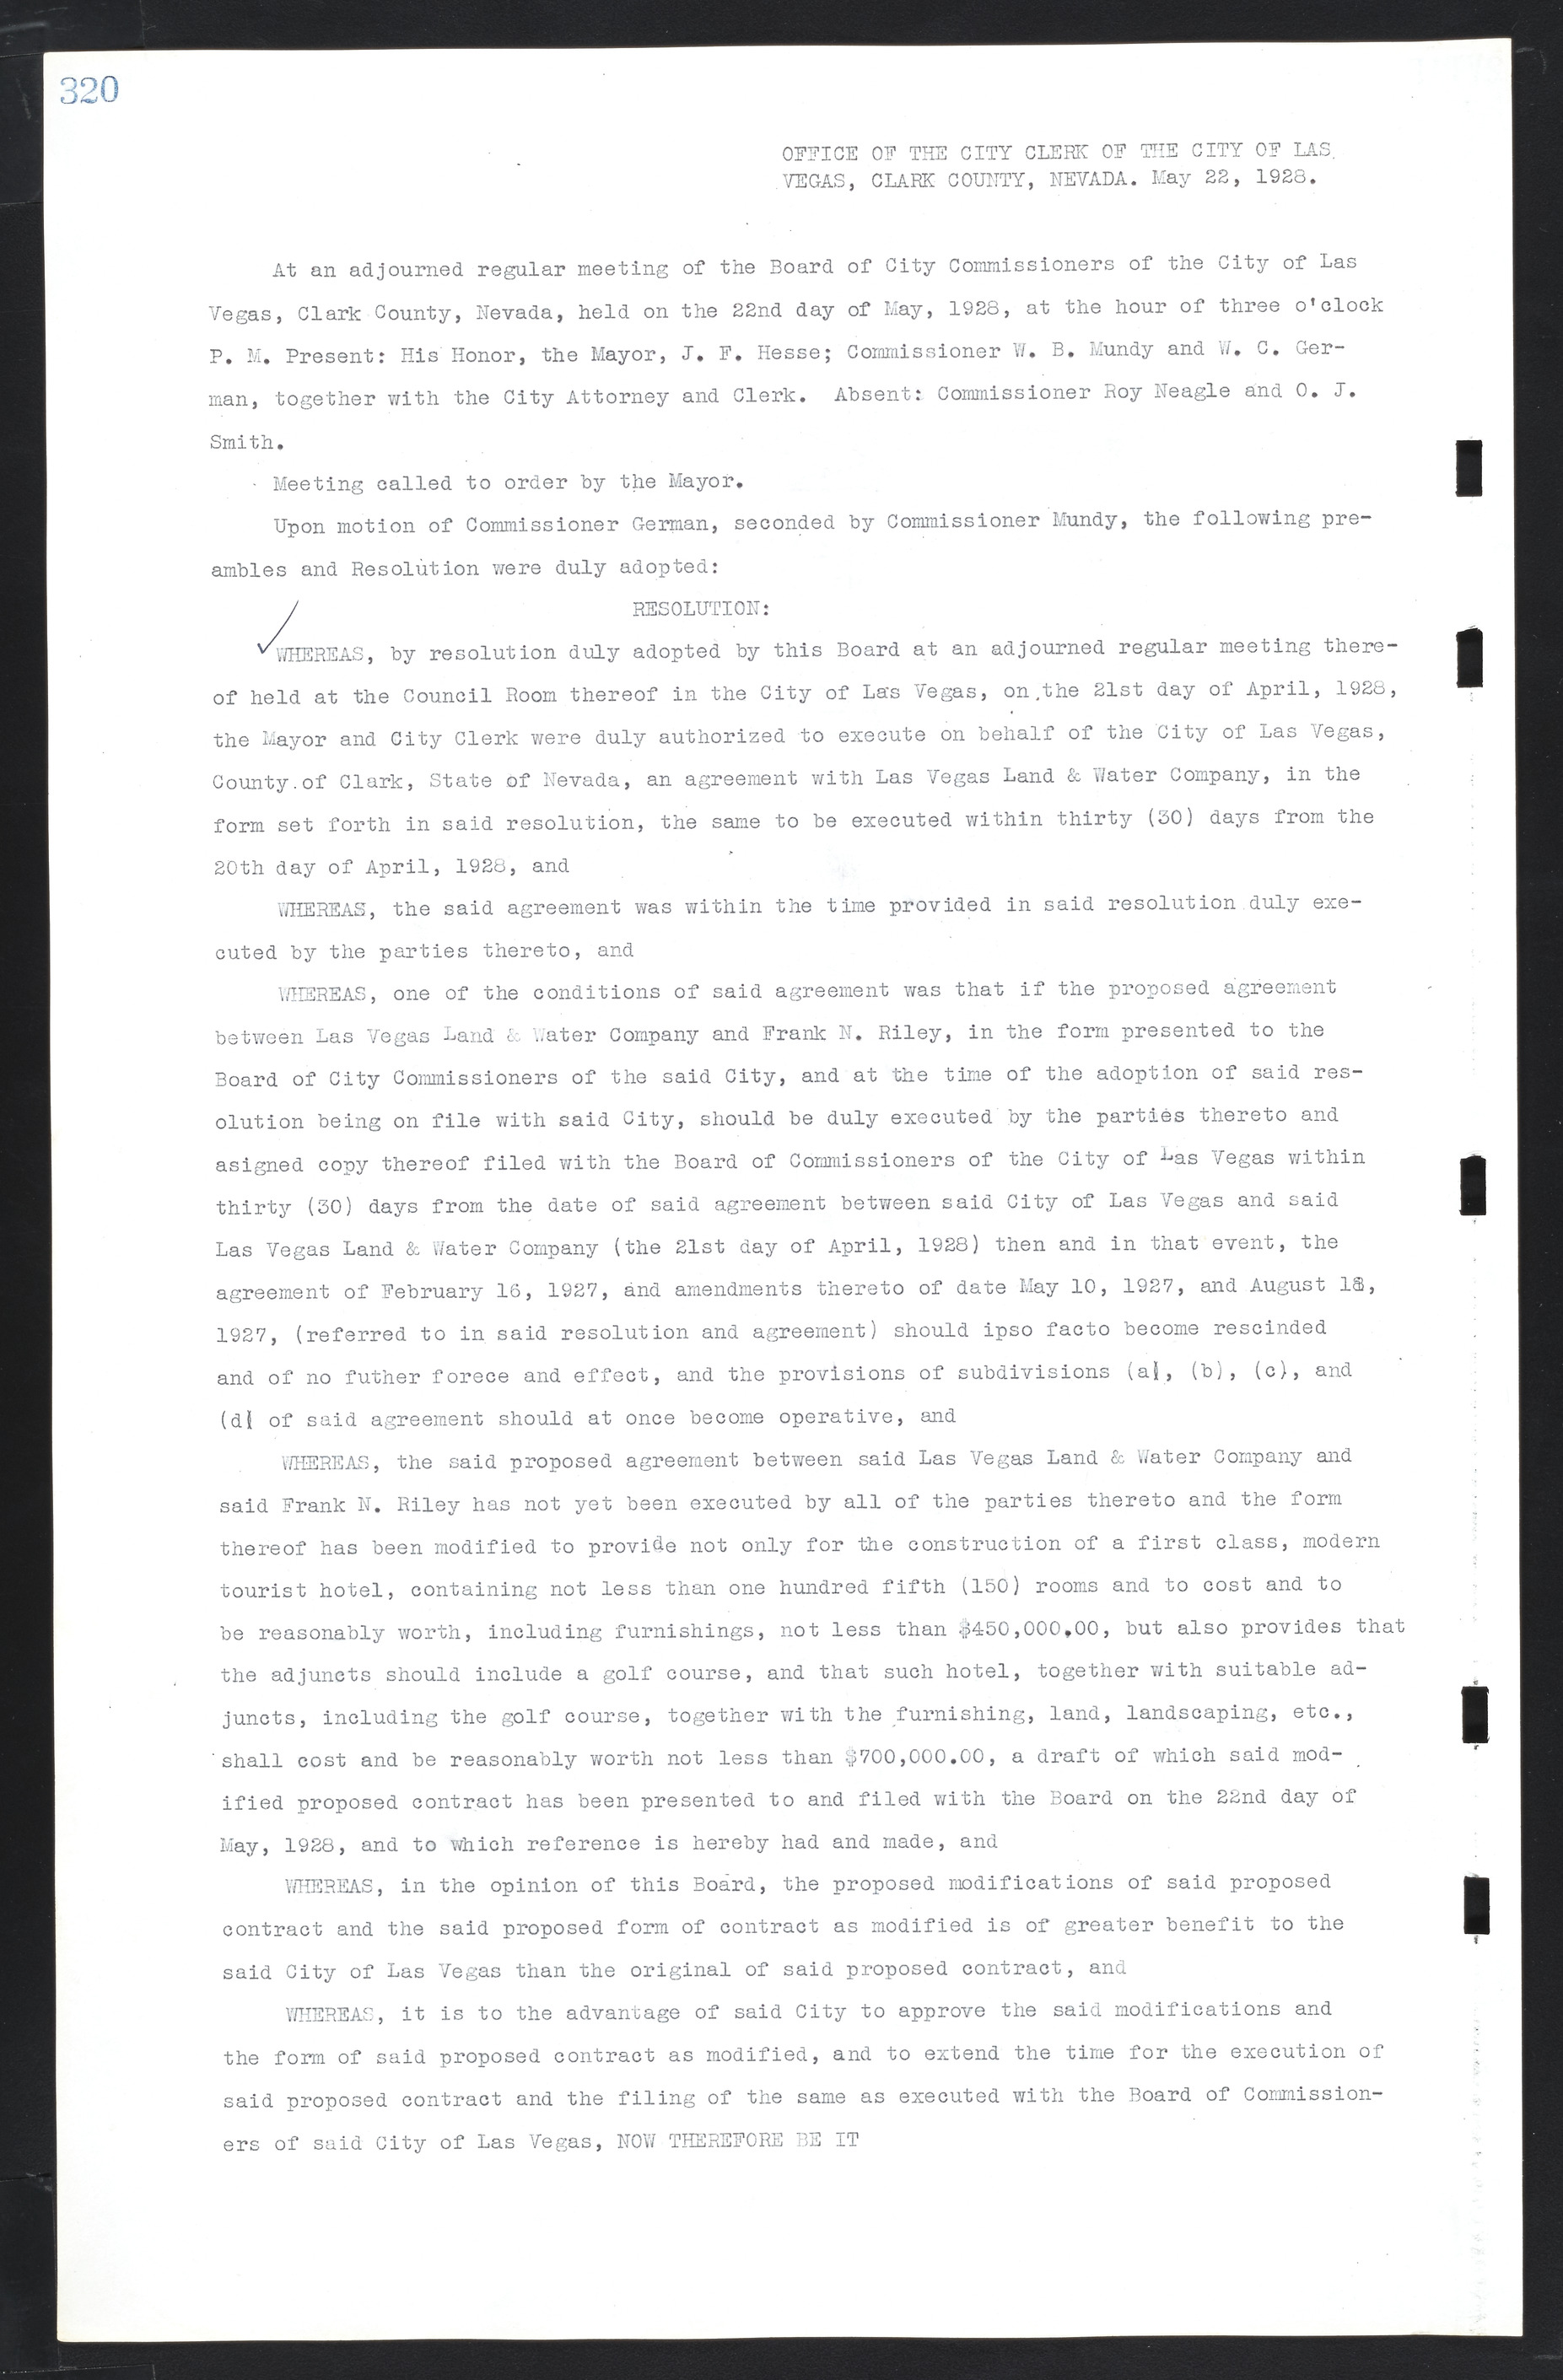 Las Vegas City Commission Minutes, March 1, 1922 to May 10, 1929, lvc000002-329